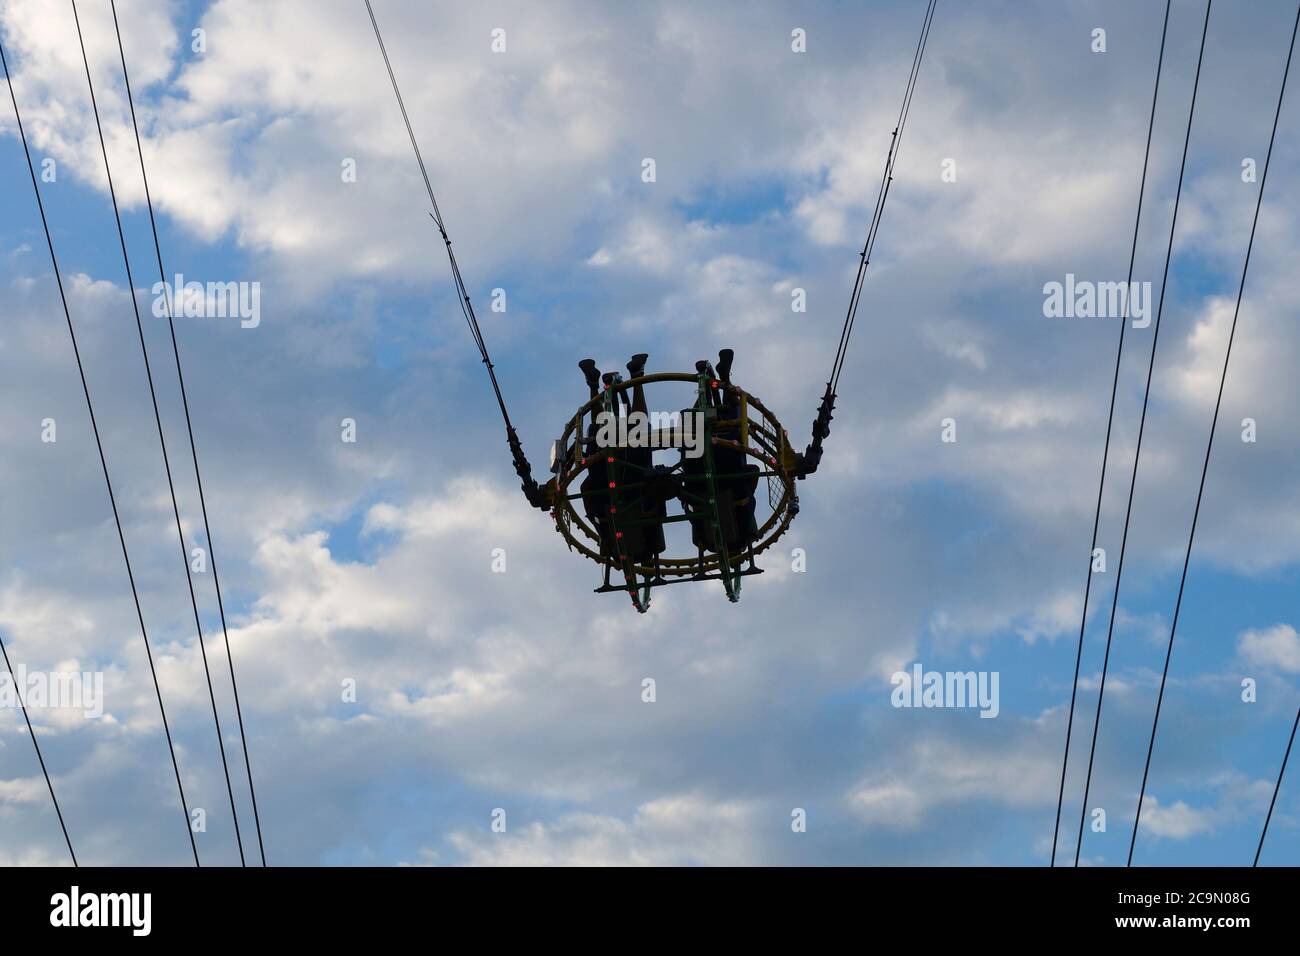 two people on the bungee ride bottom view. Stock Photo